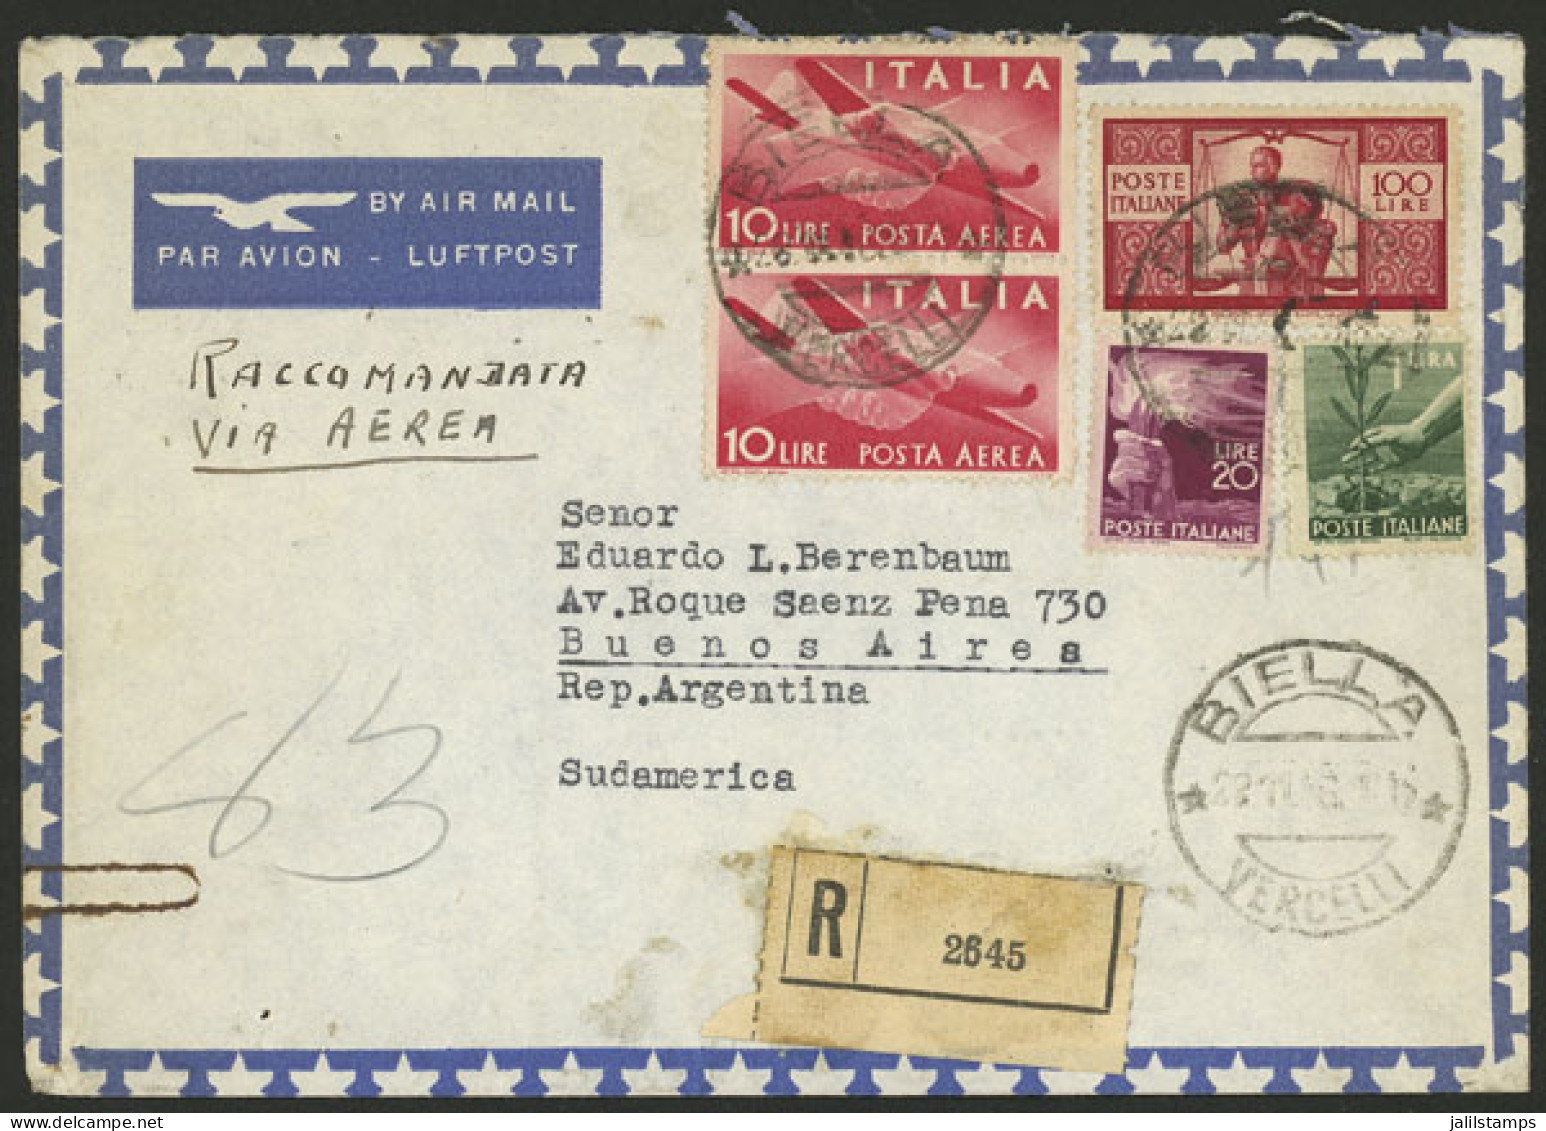 ITALY: 28/NO/1946 Biella - Argentina, Registered Airmail Cover Franked With 141L. Including One 100L. Red Democratica, T - Unclassified